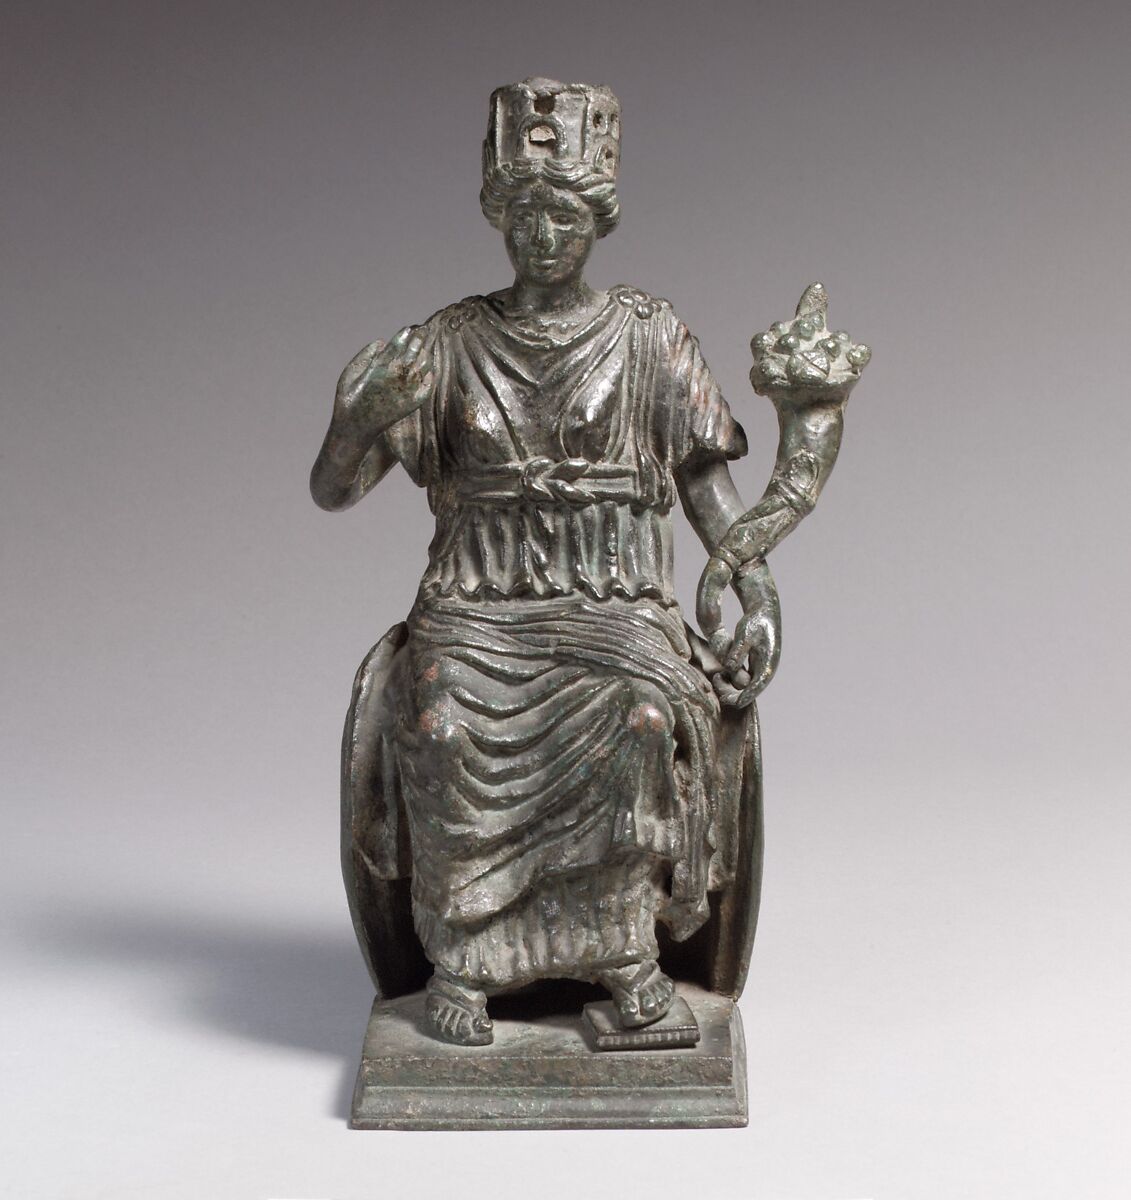 Statuette of the Personification of a City, Copper alloy, Late Roman or Byzantine 